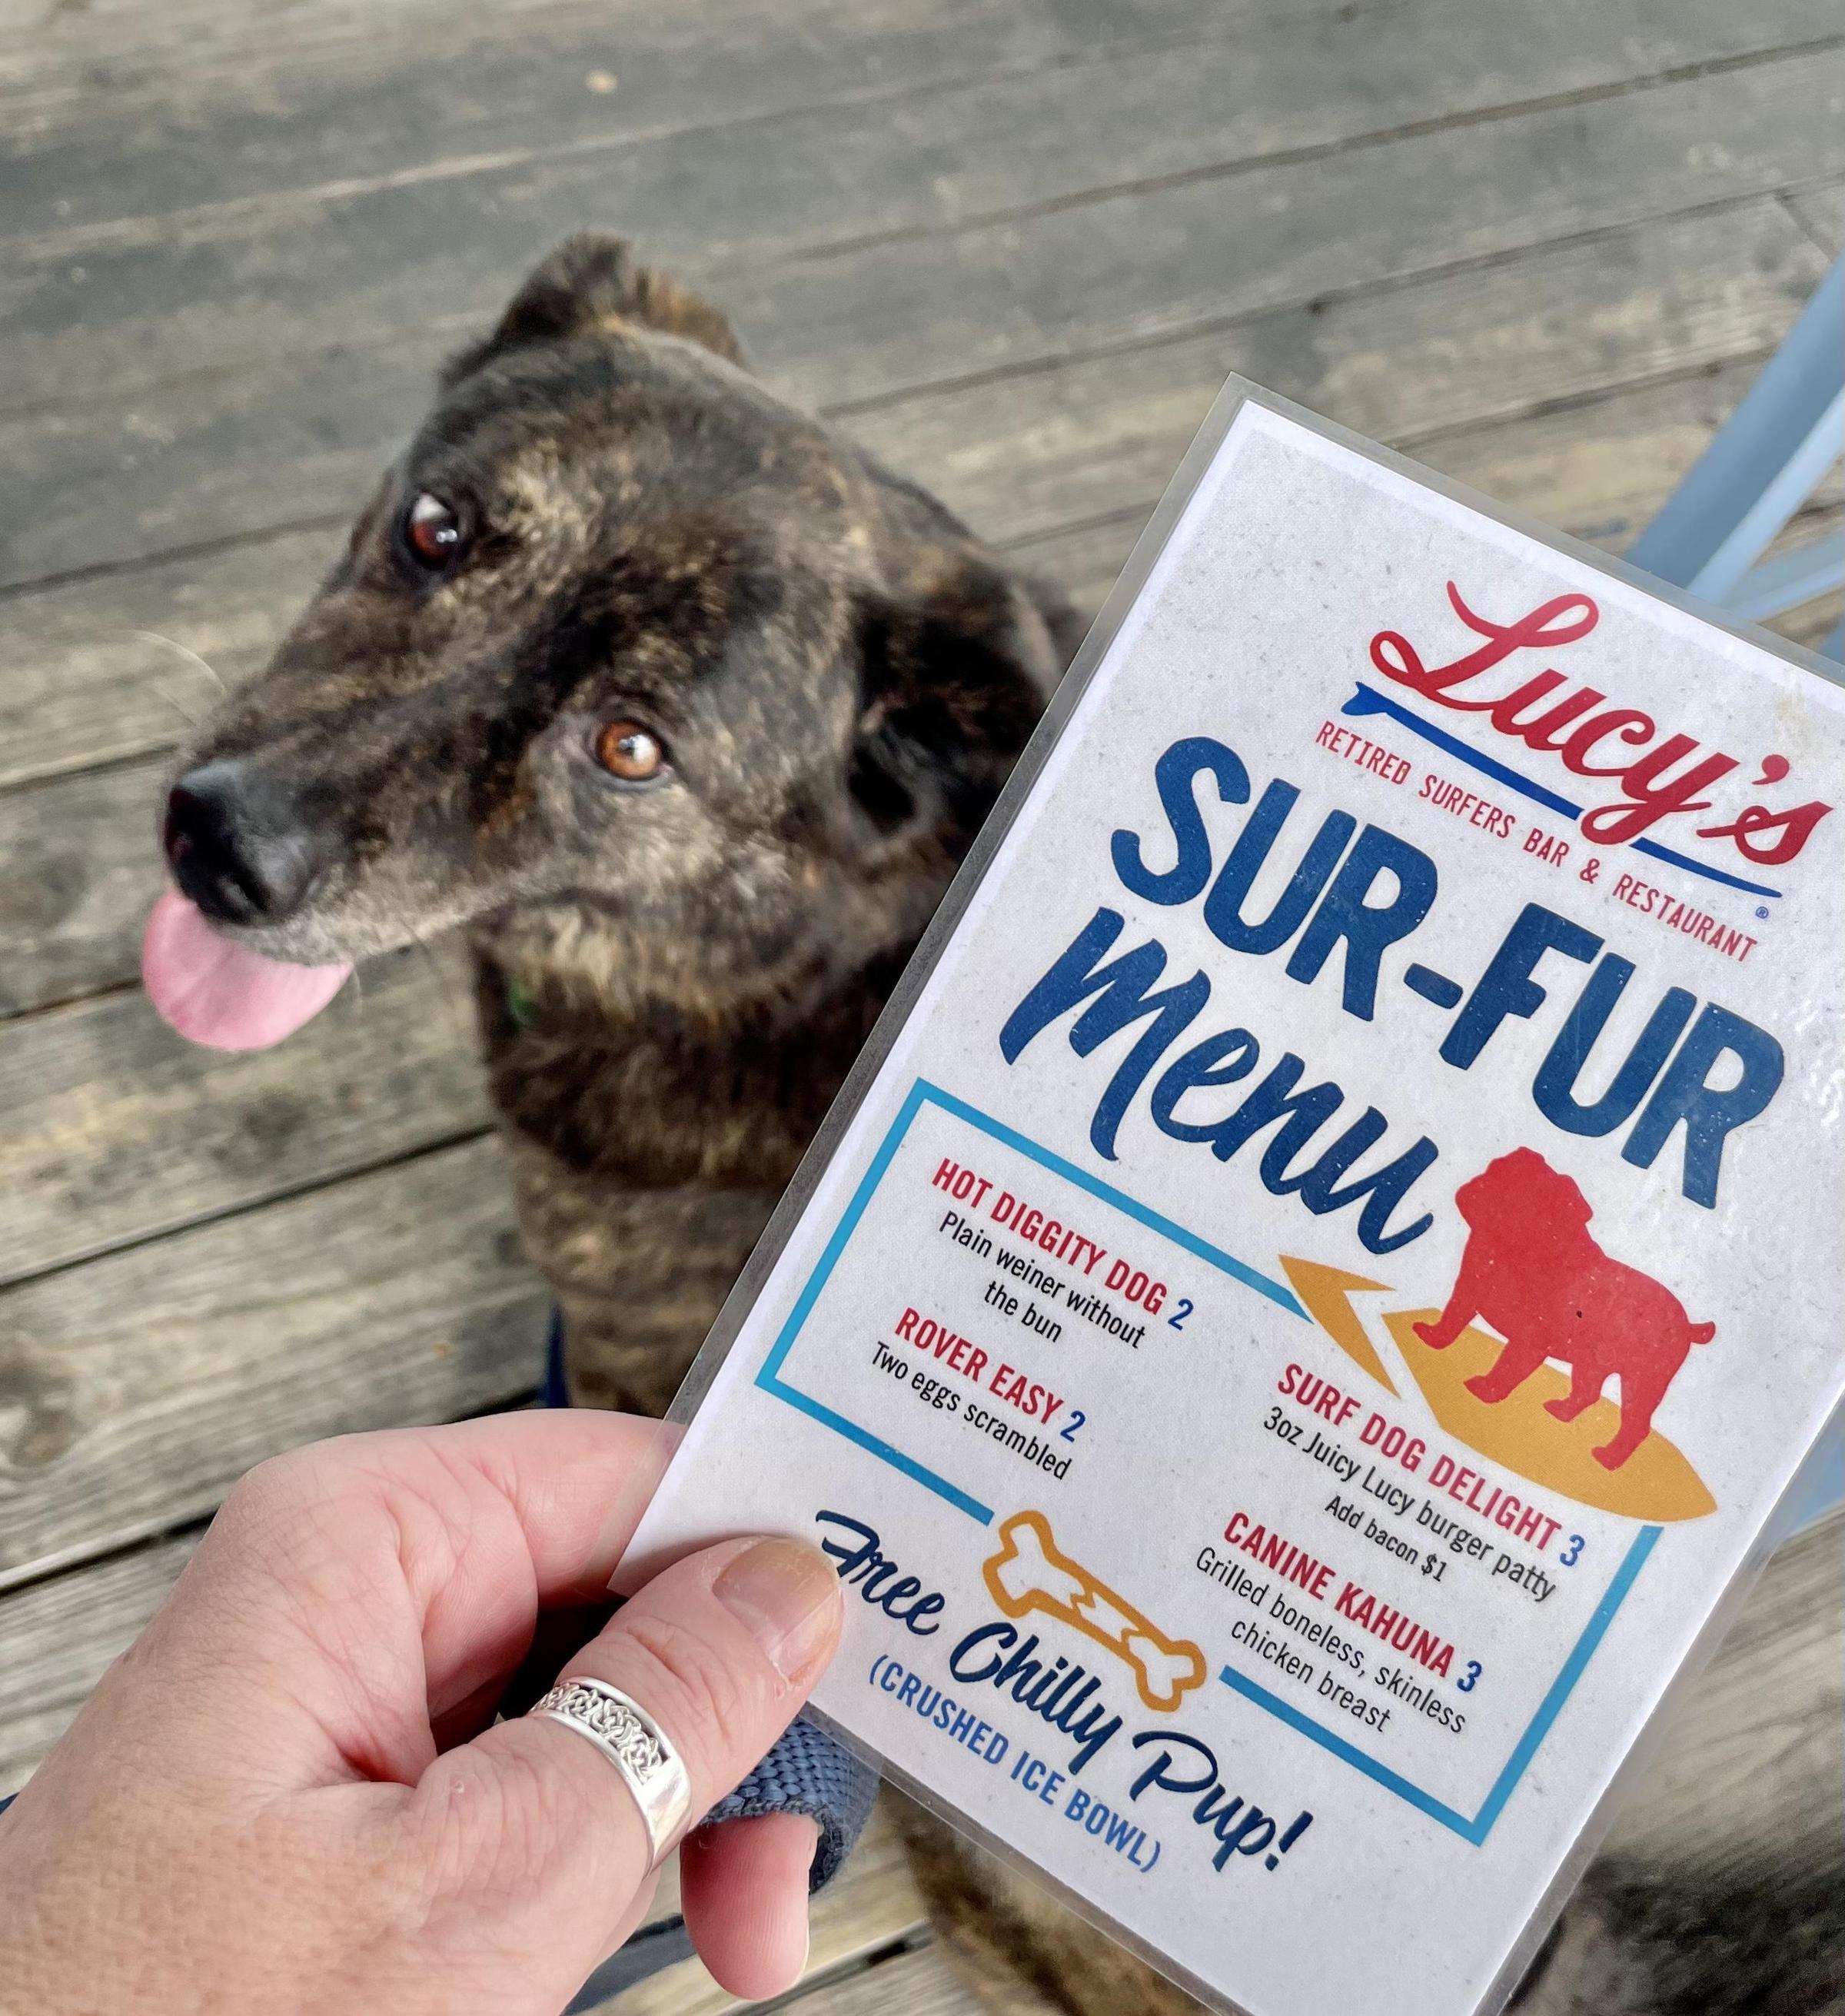 Pet Friendly Lucy's Retired Surfers Bar & Restaurant